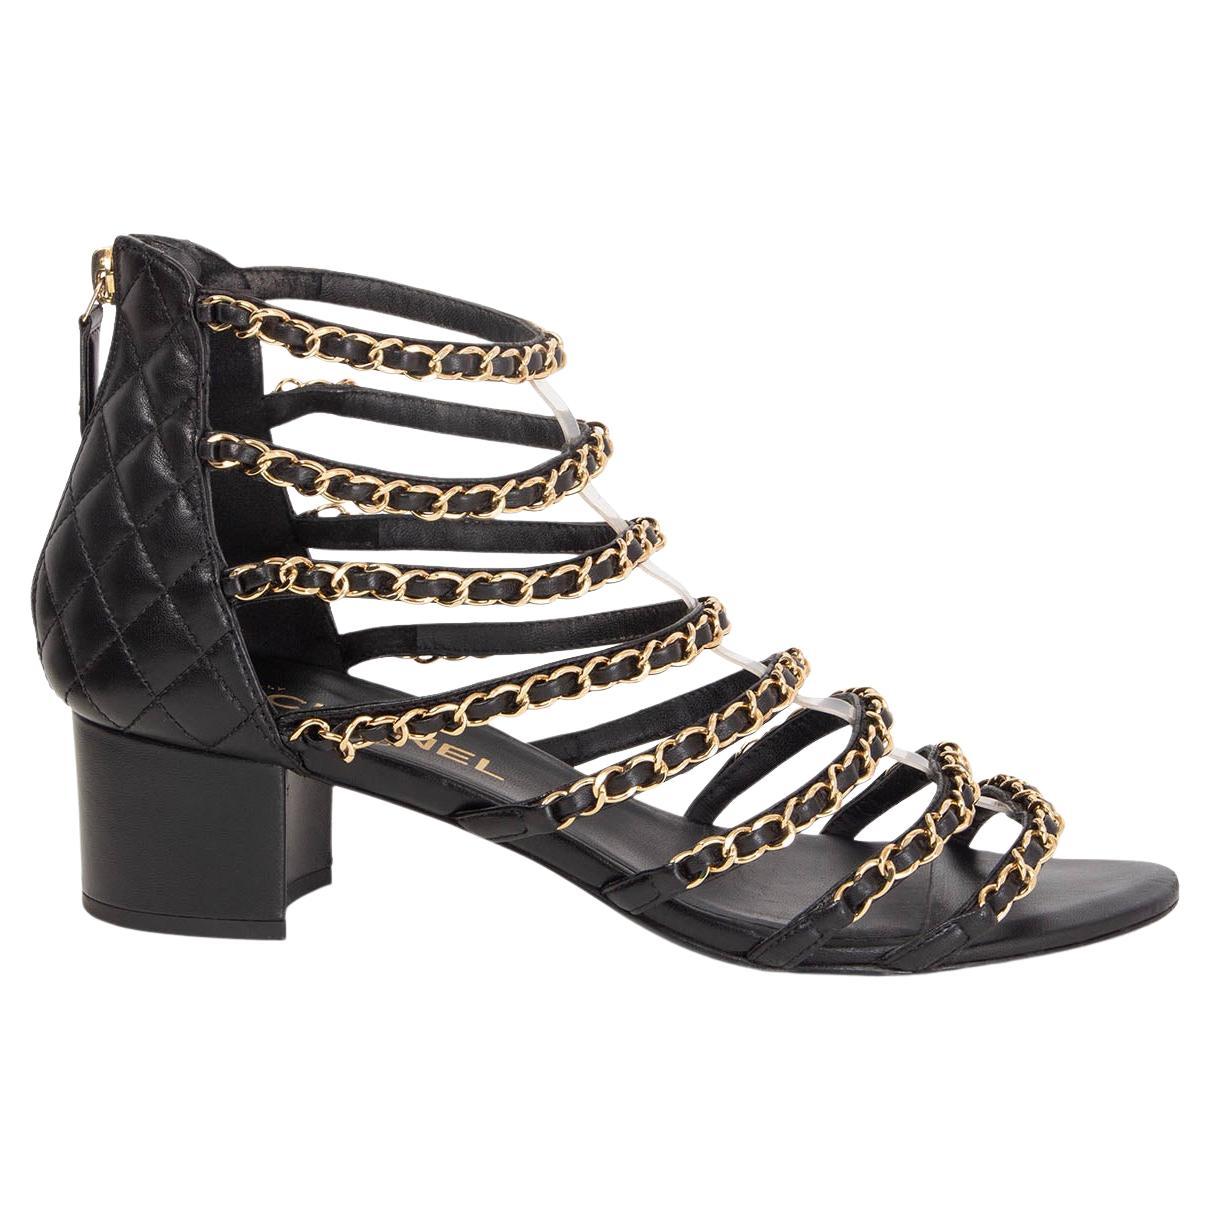 CHANEL black leather CHAIN GLADIATOR BLOCK HEEL Sandals Shoes 39